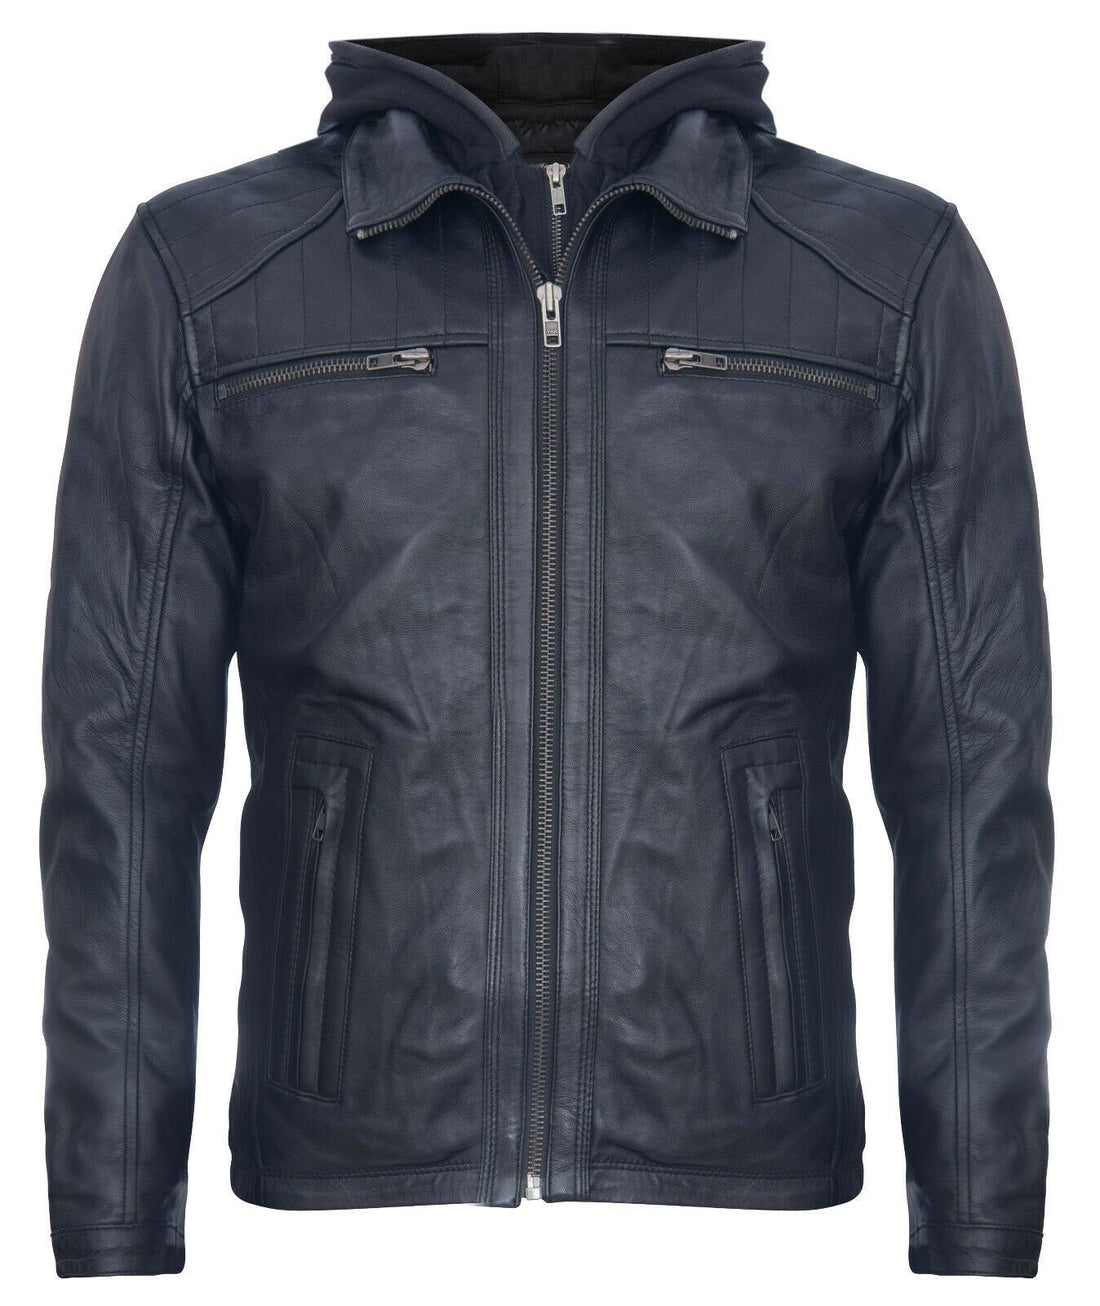 Mens Hooded Classic Black Leather Jacket-Stalham - Upperclass Fashions 